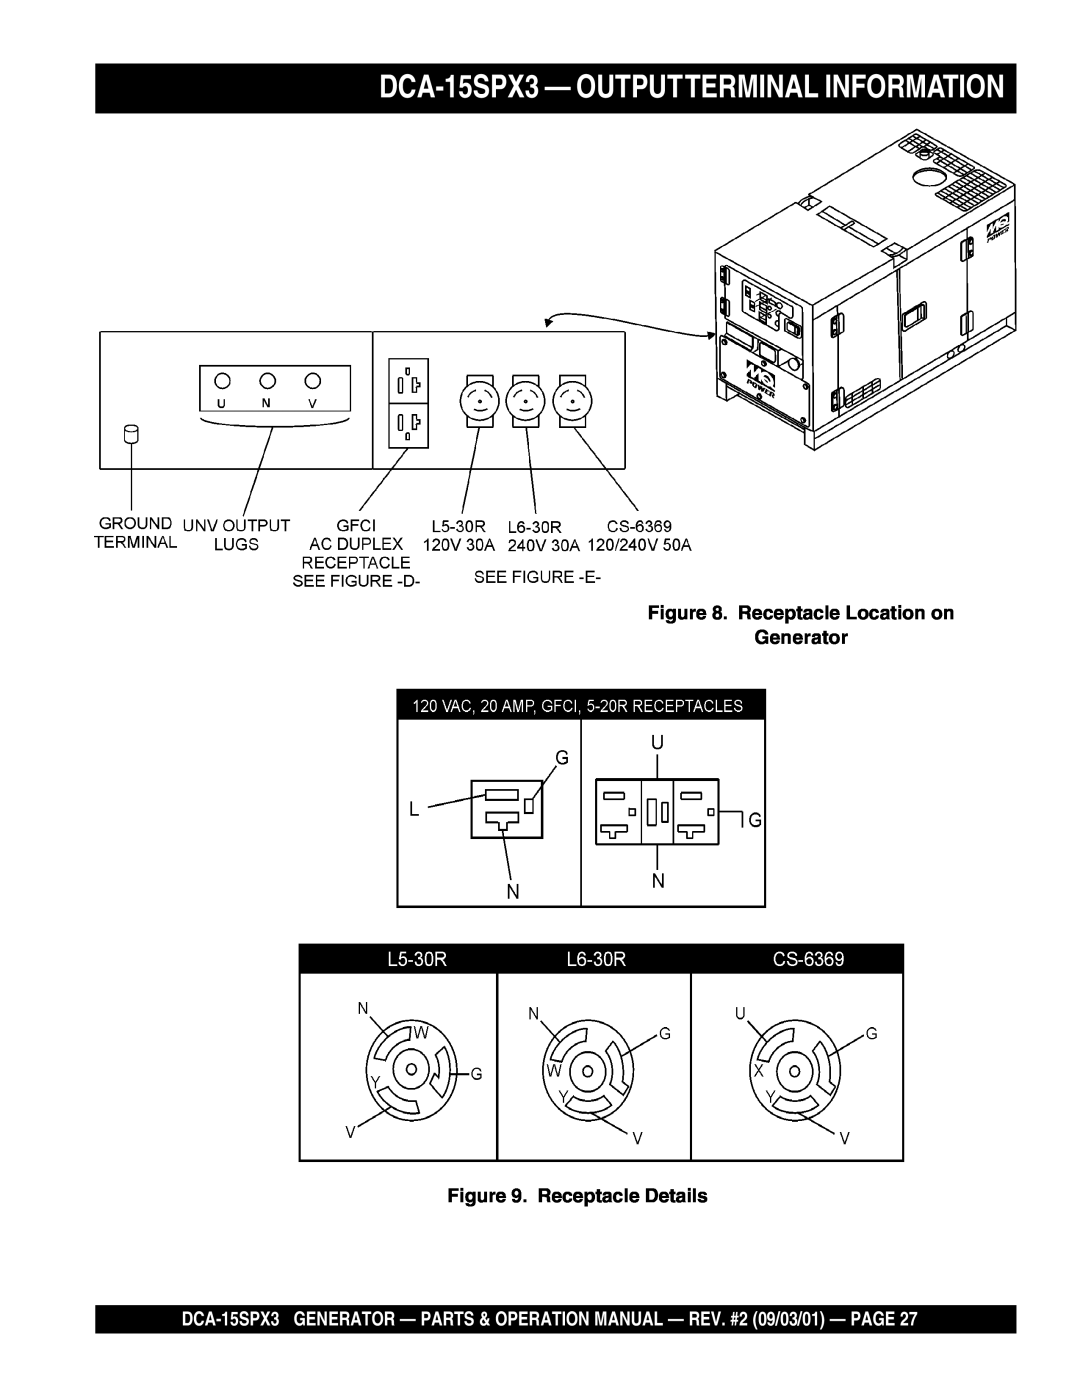 Multiquip operation manual DCA-15SPX3— OUTPUTTERMINAL INFORMATION, Receptacle Location on Generator, Receptacle Details 